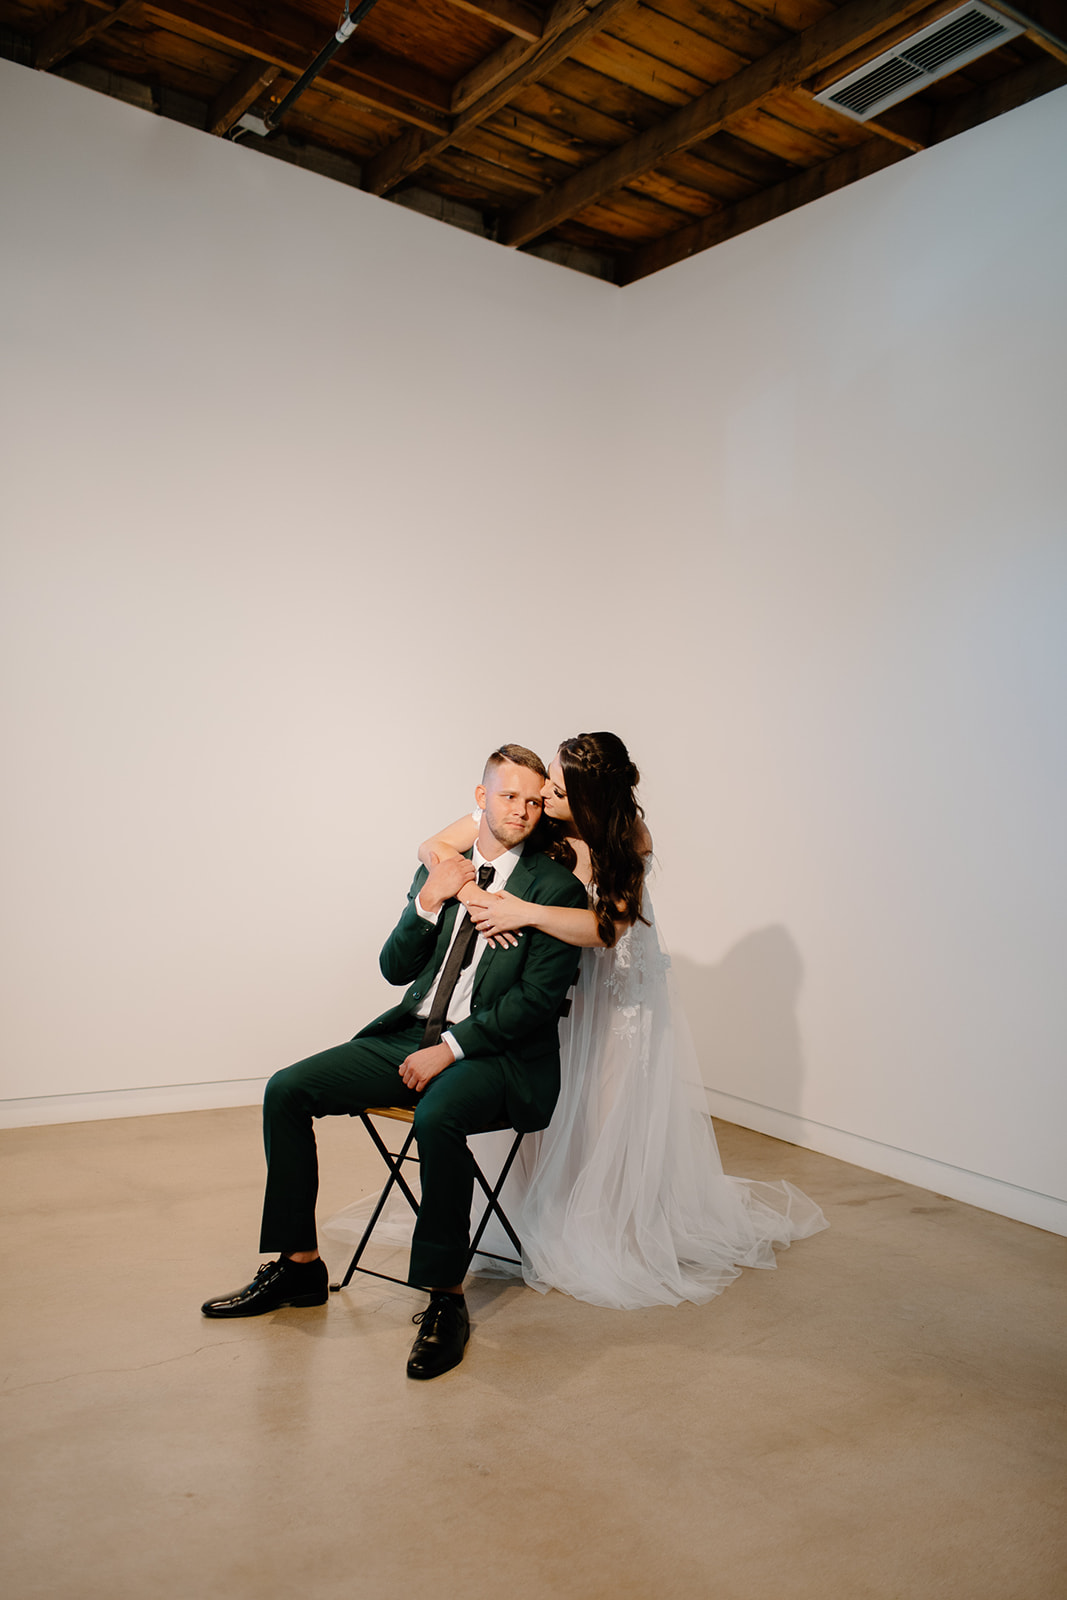 Groom sitting in chair, bride with arms over his shoulders giving him a kiss on the cheek.